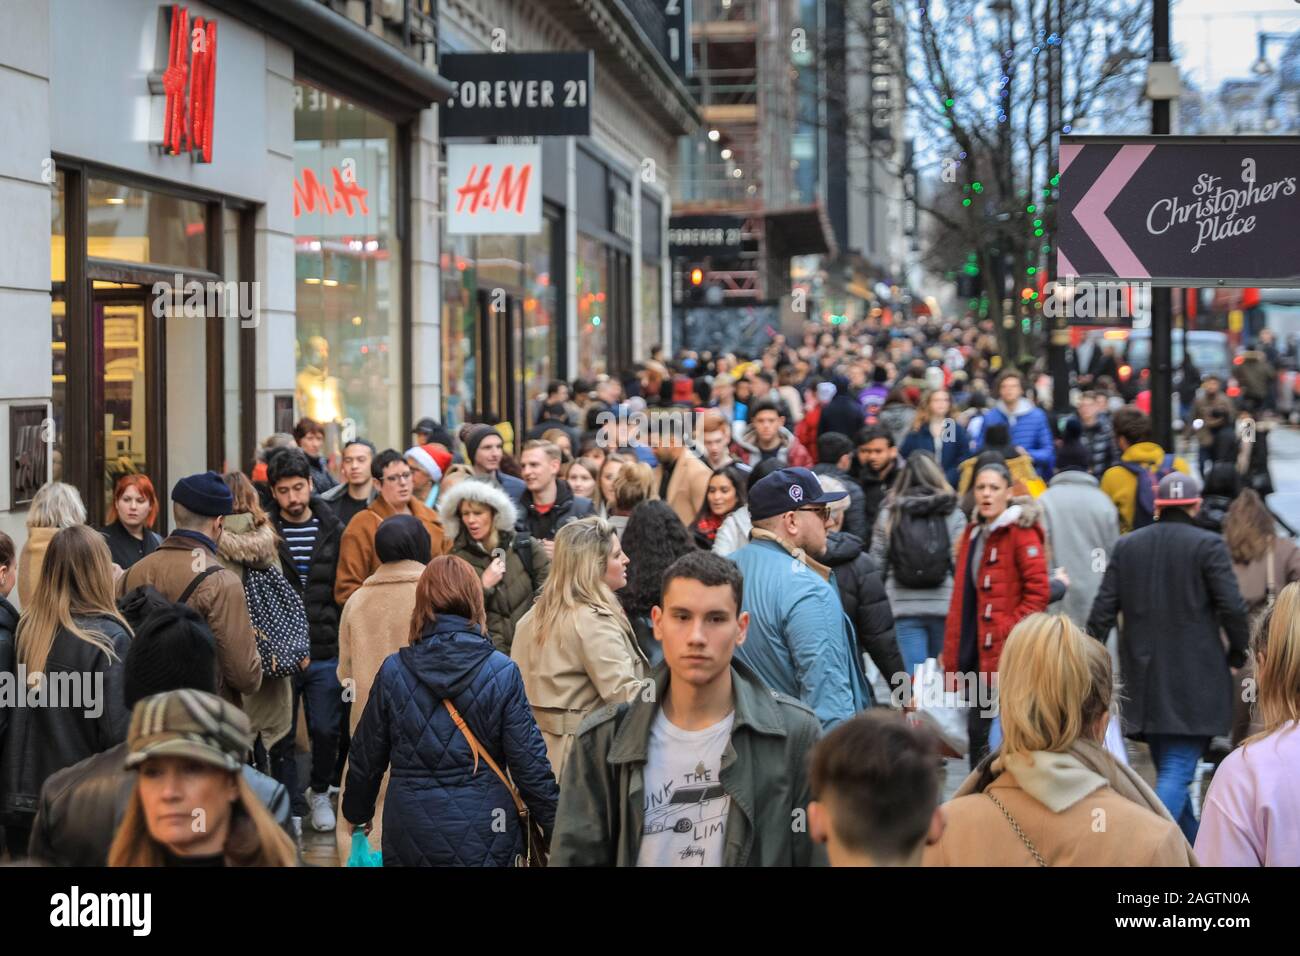 Central London, London, 21st Dec 2019. Oxford Street is crowded with shoppers. Shoppers in Oxford Street, Regent Street and Bond Street rush to make their last minute purchases in time for Christmas, whilst shops have already started heavy discounting on many goods. Stock Photo